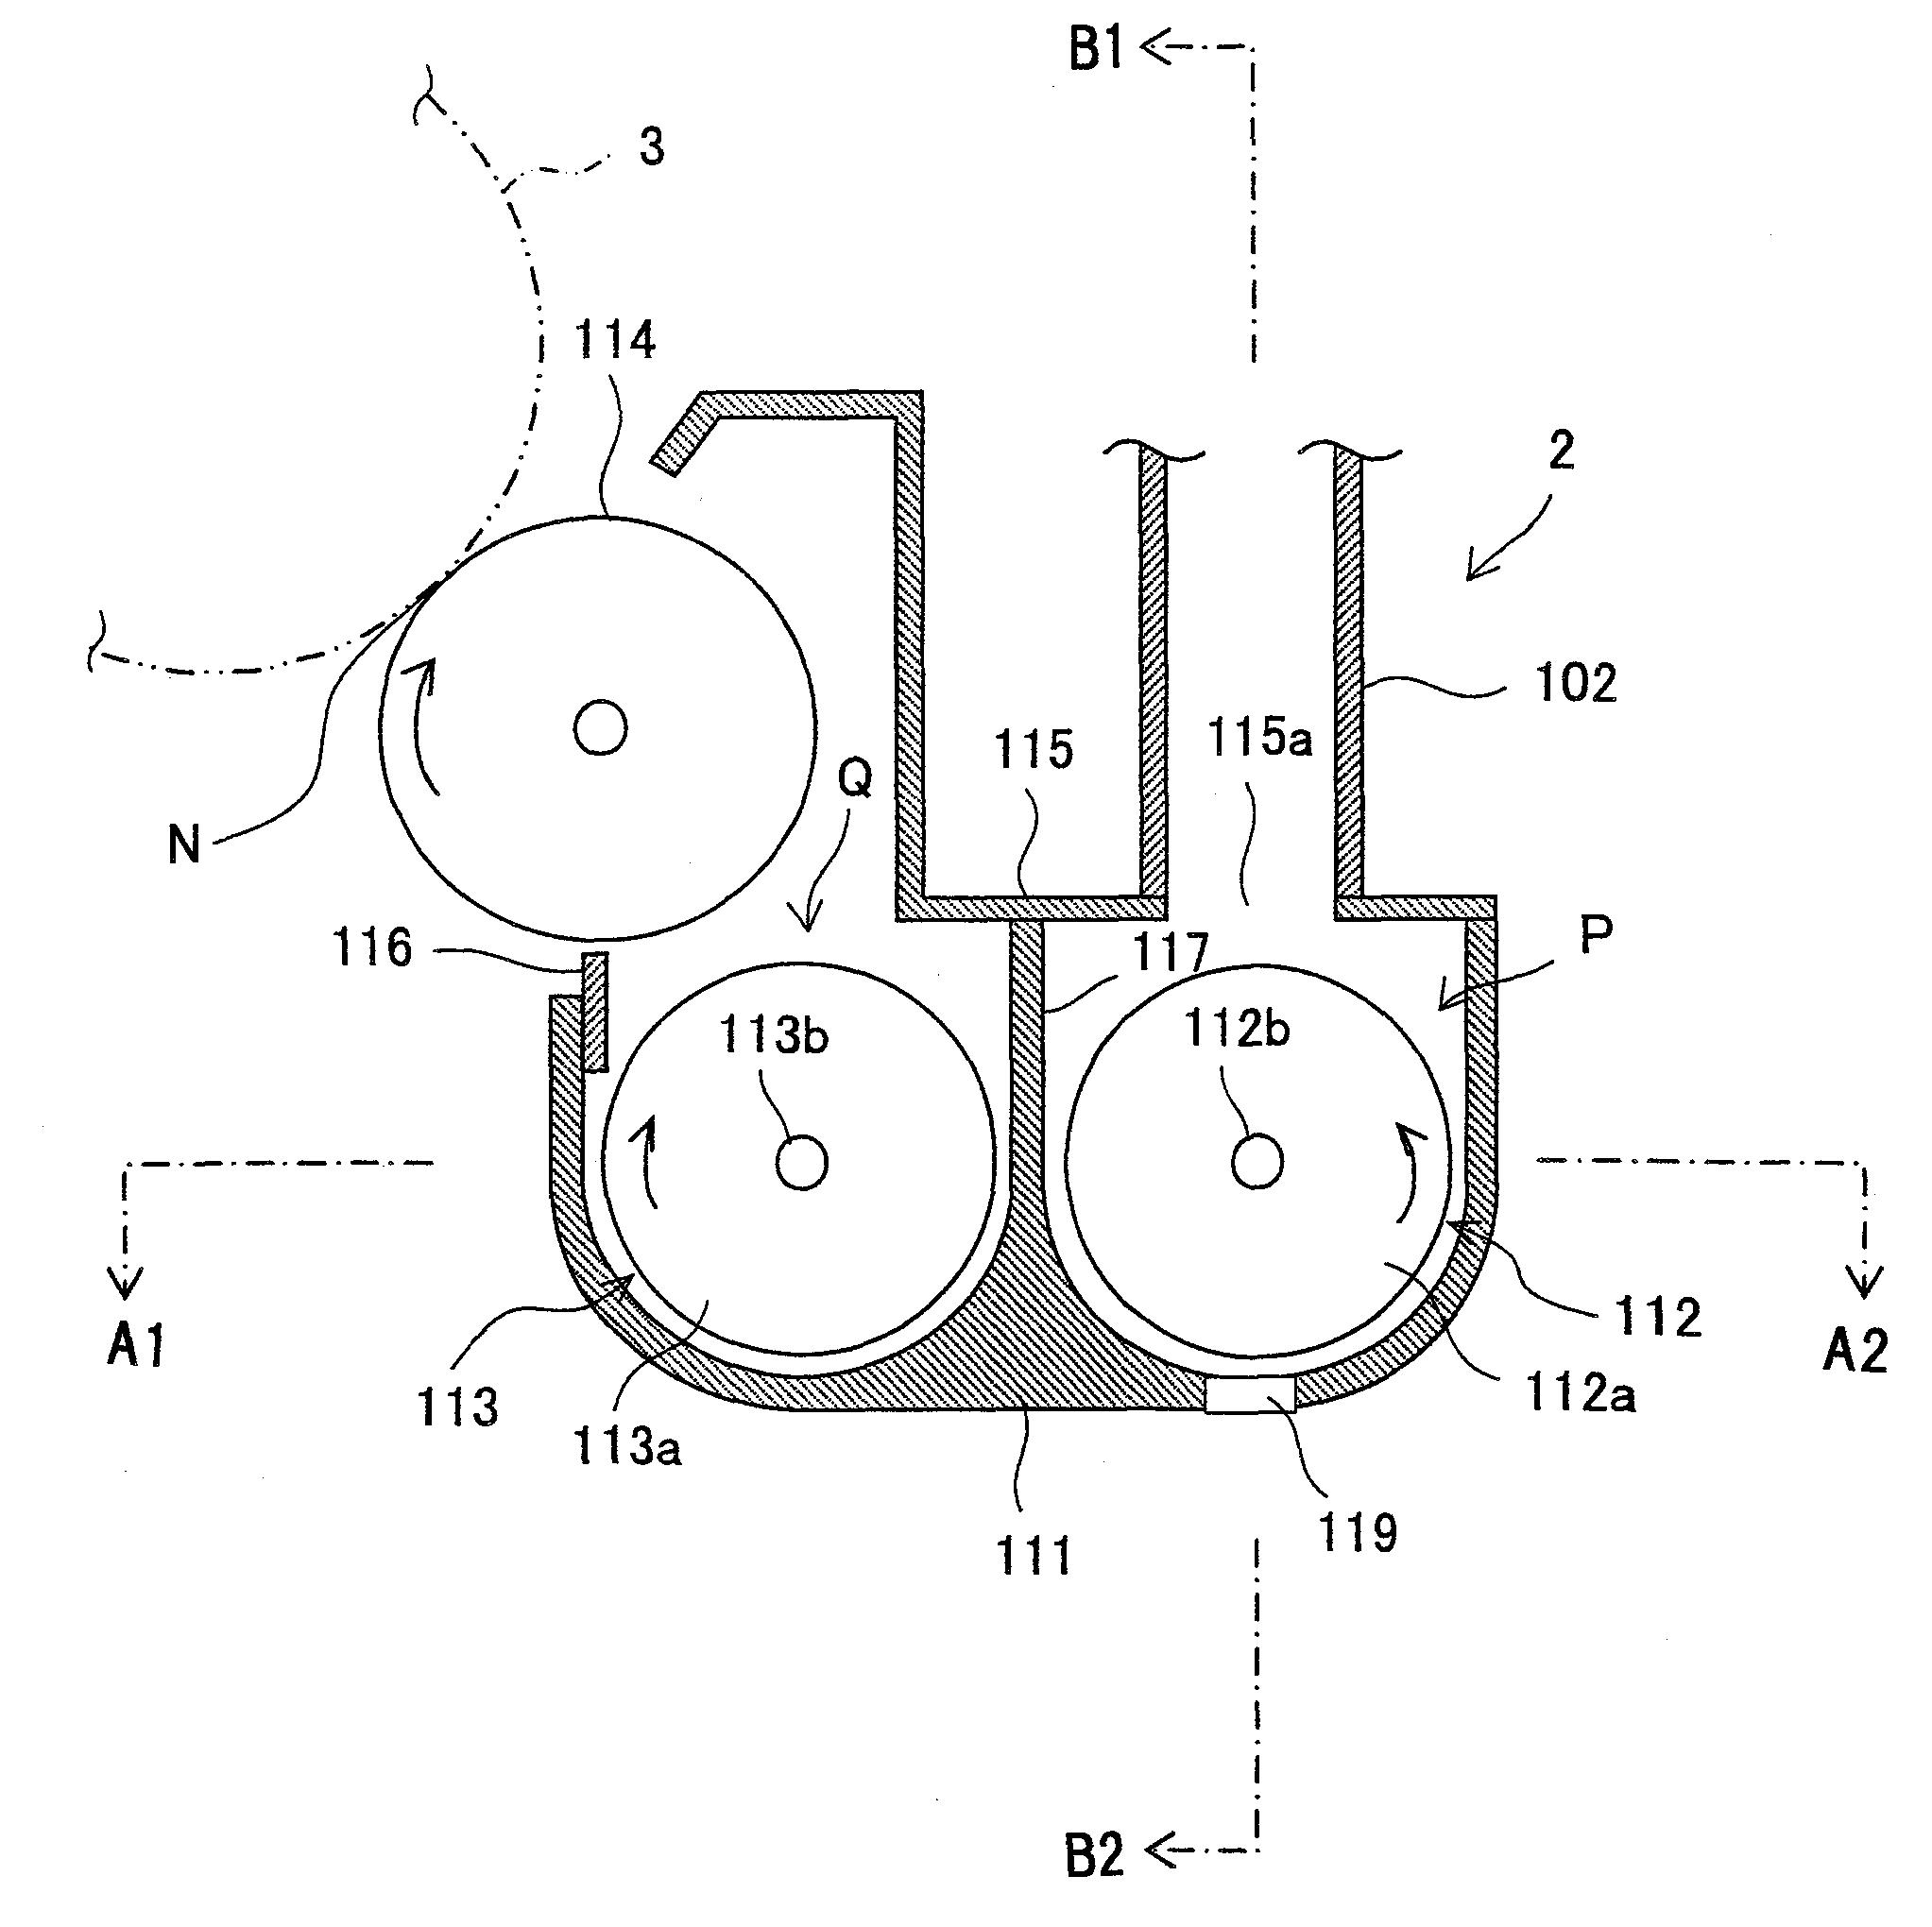 Image forming apparatus and toner supply method